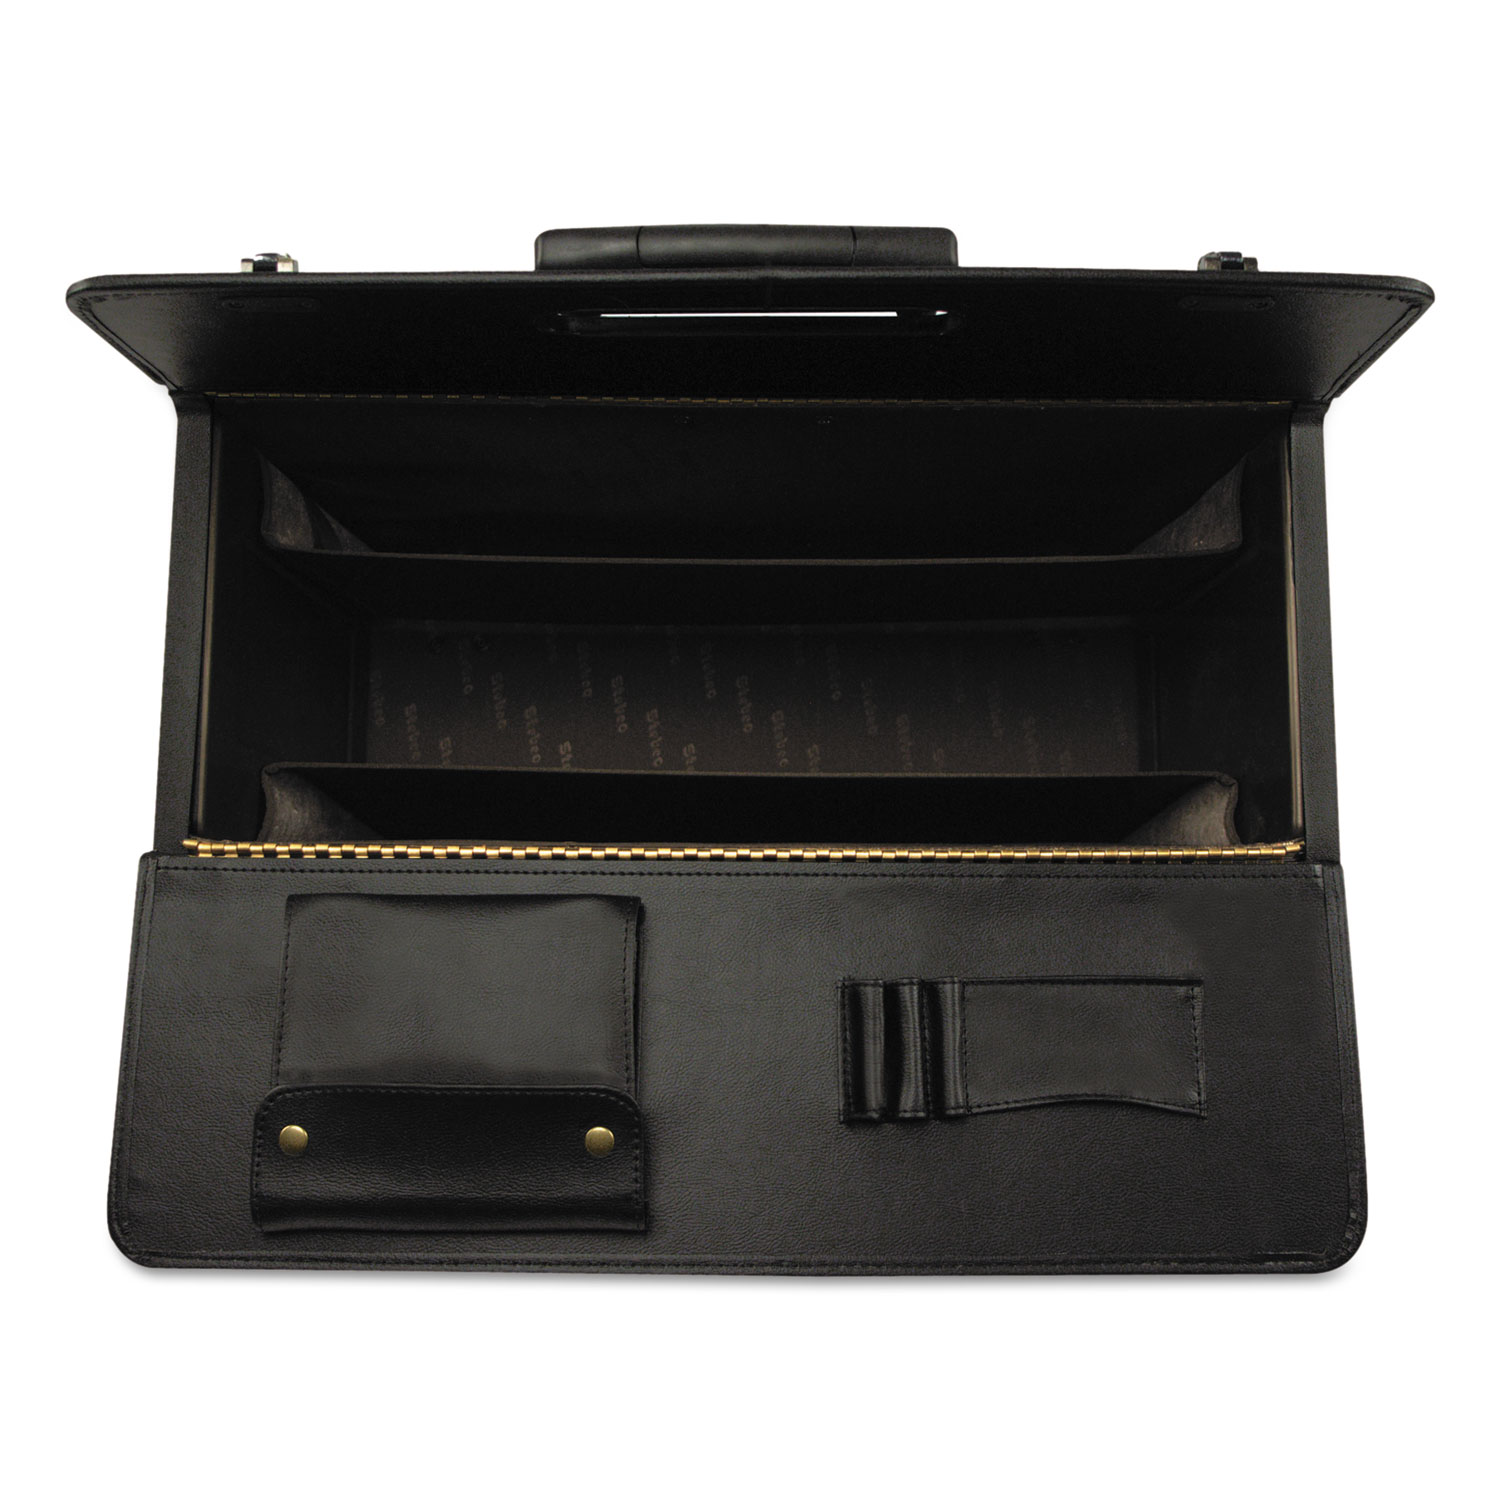 STEBCO Collection Tufide Rolling Catalog Case, 22 1/4 x 9 x 13 1/2, Black